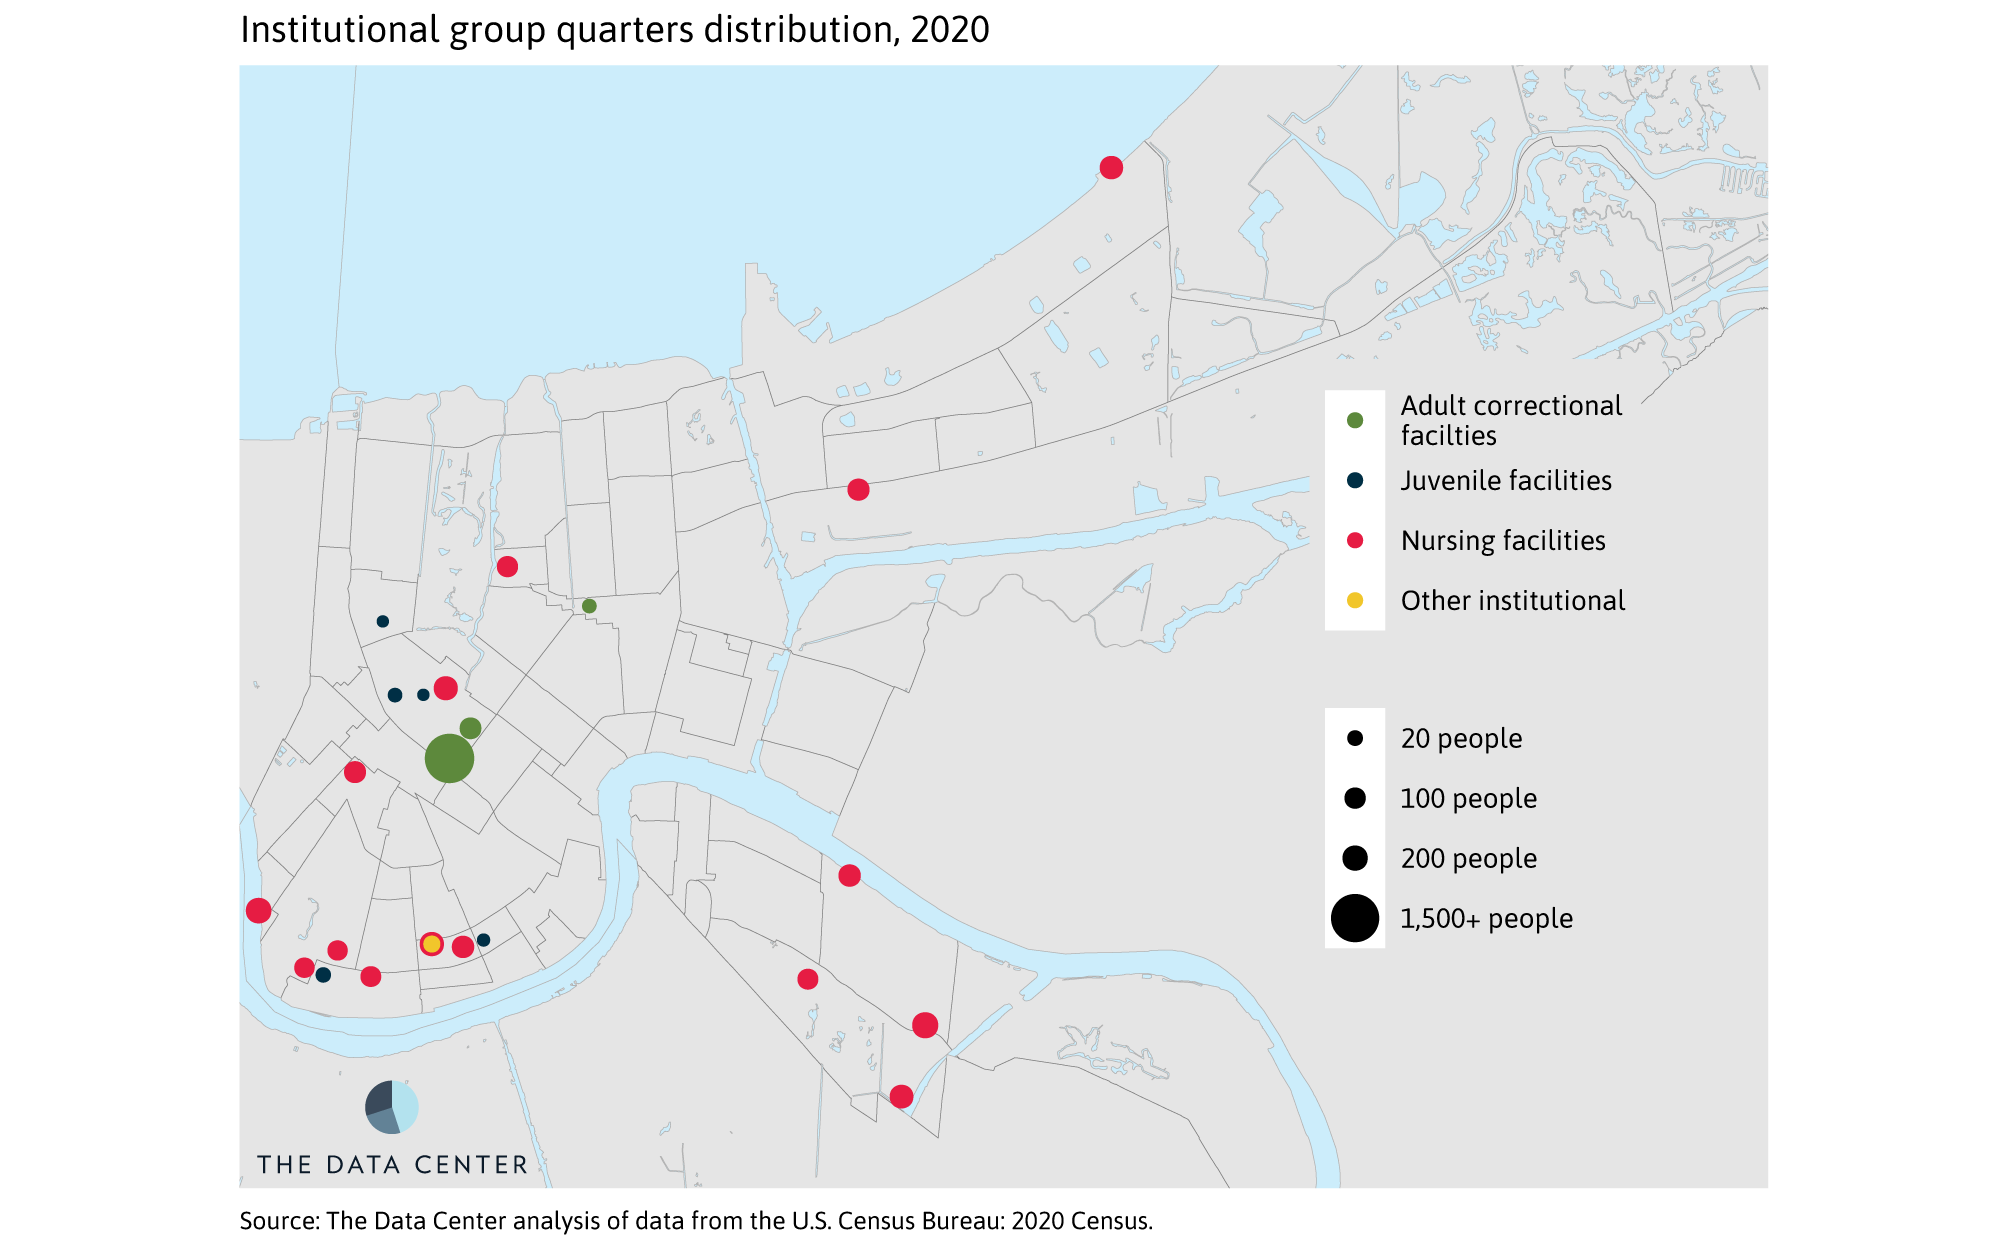 Residents in group quarters and average household size across the New Orleans metro